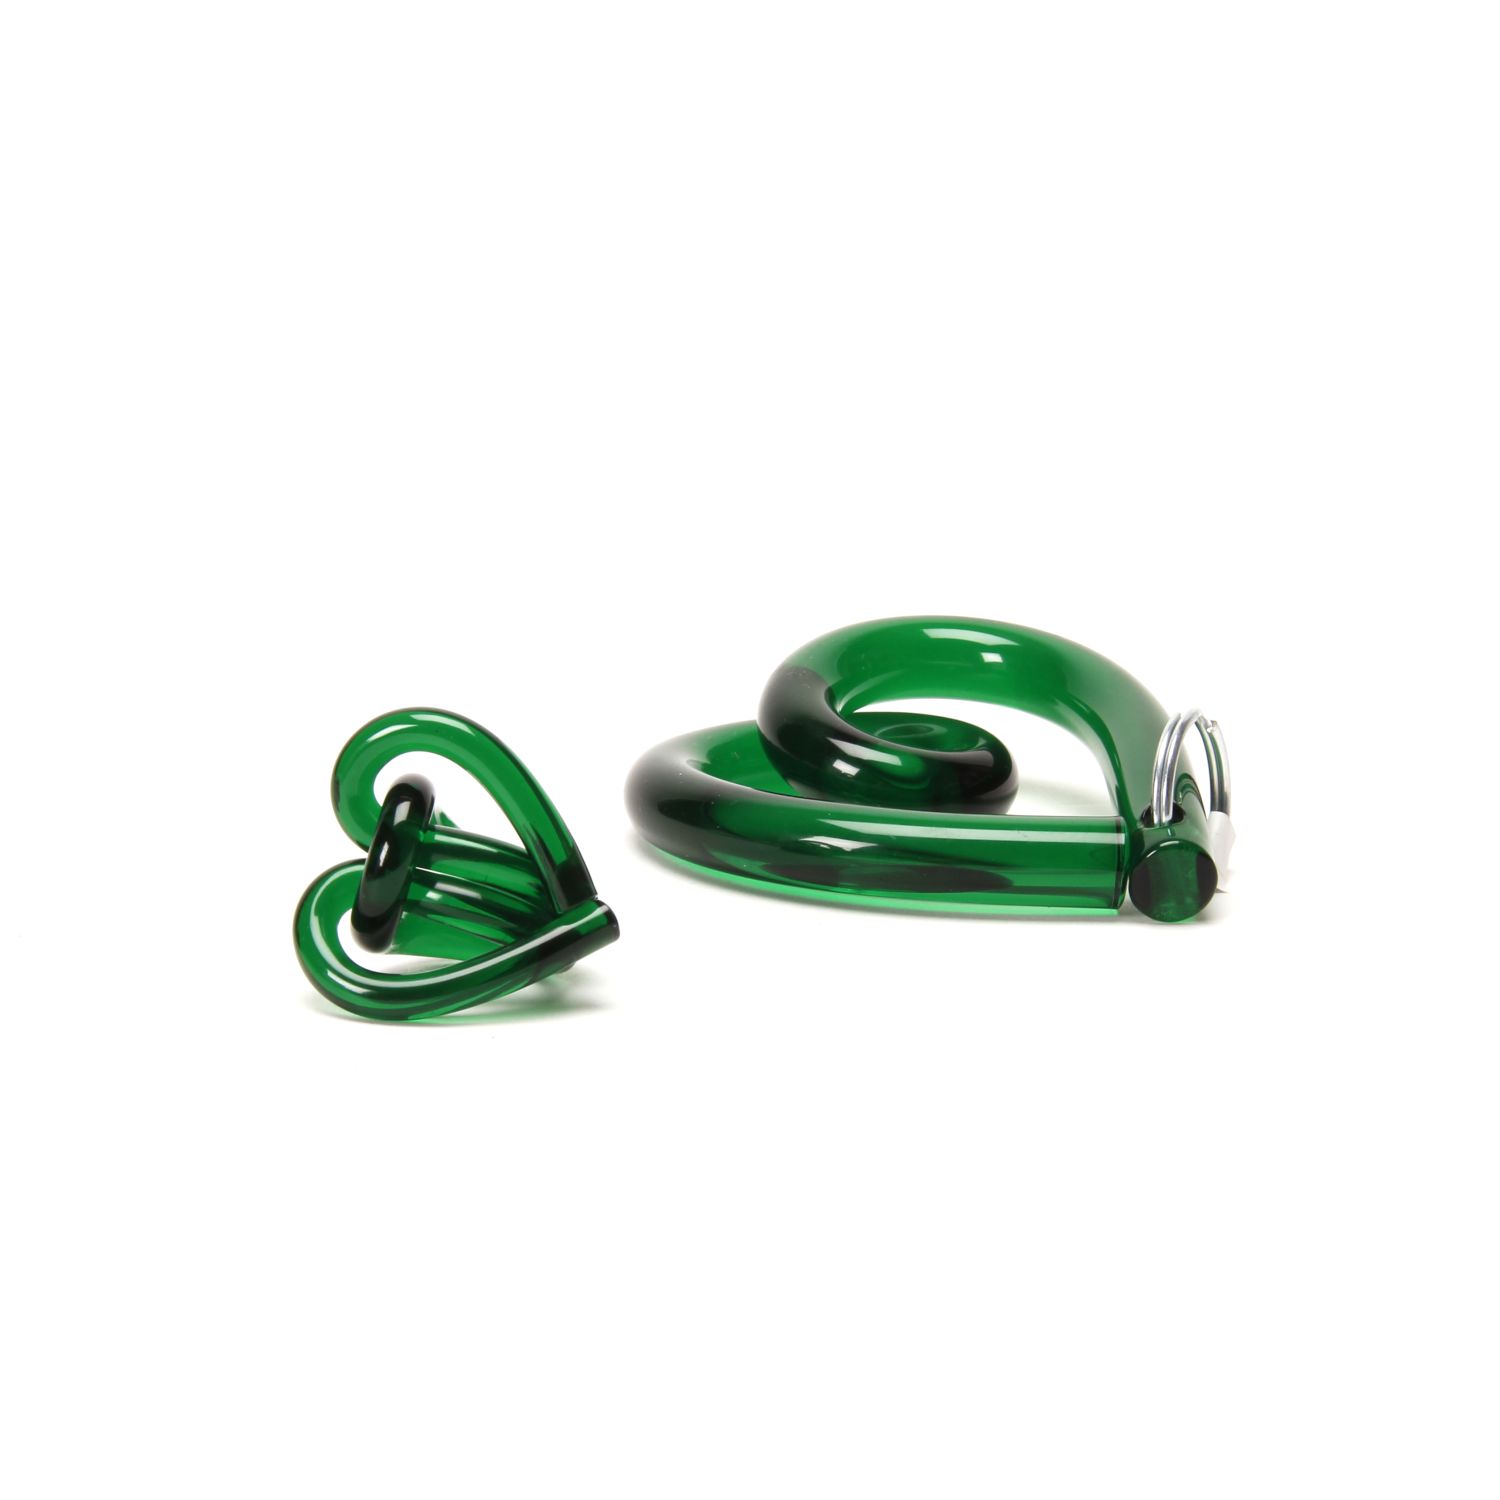 Corey Moranis: Heart Ring Green Product Image 3 of 3